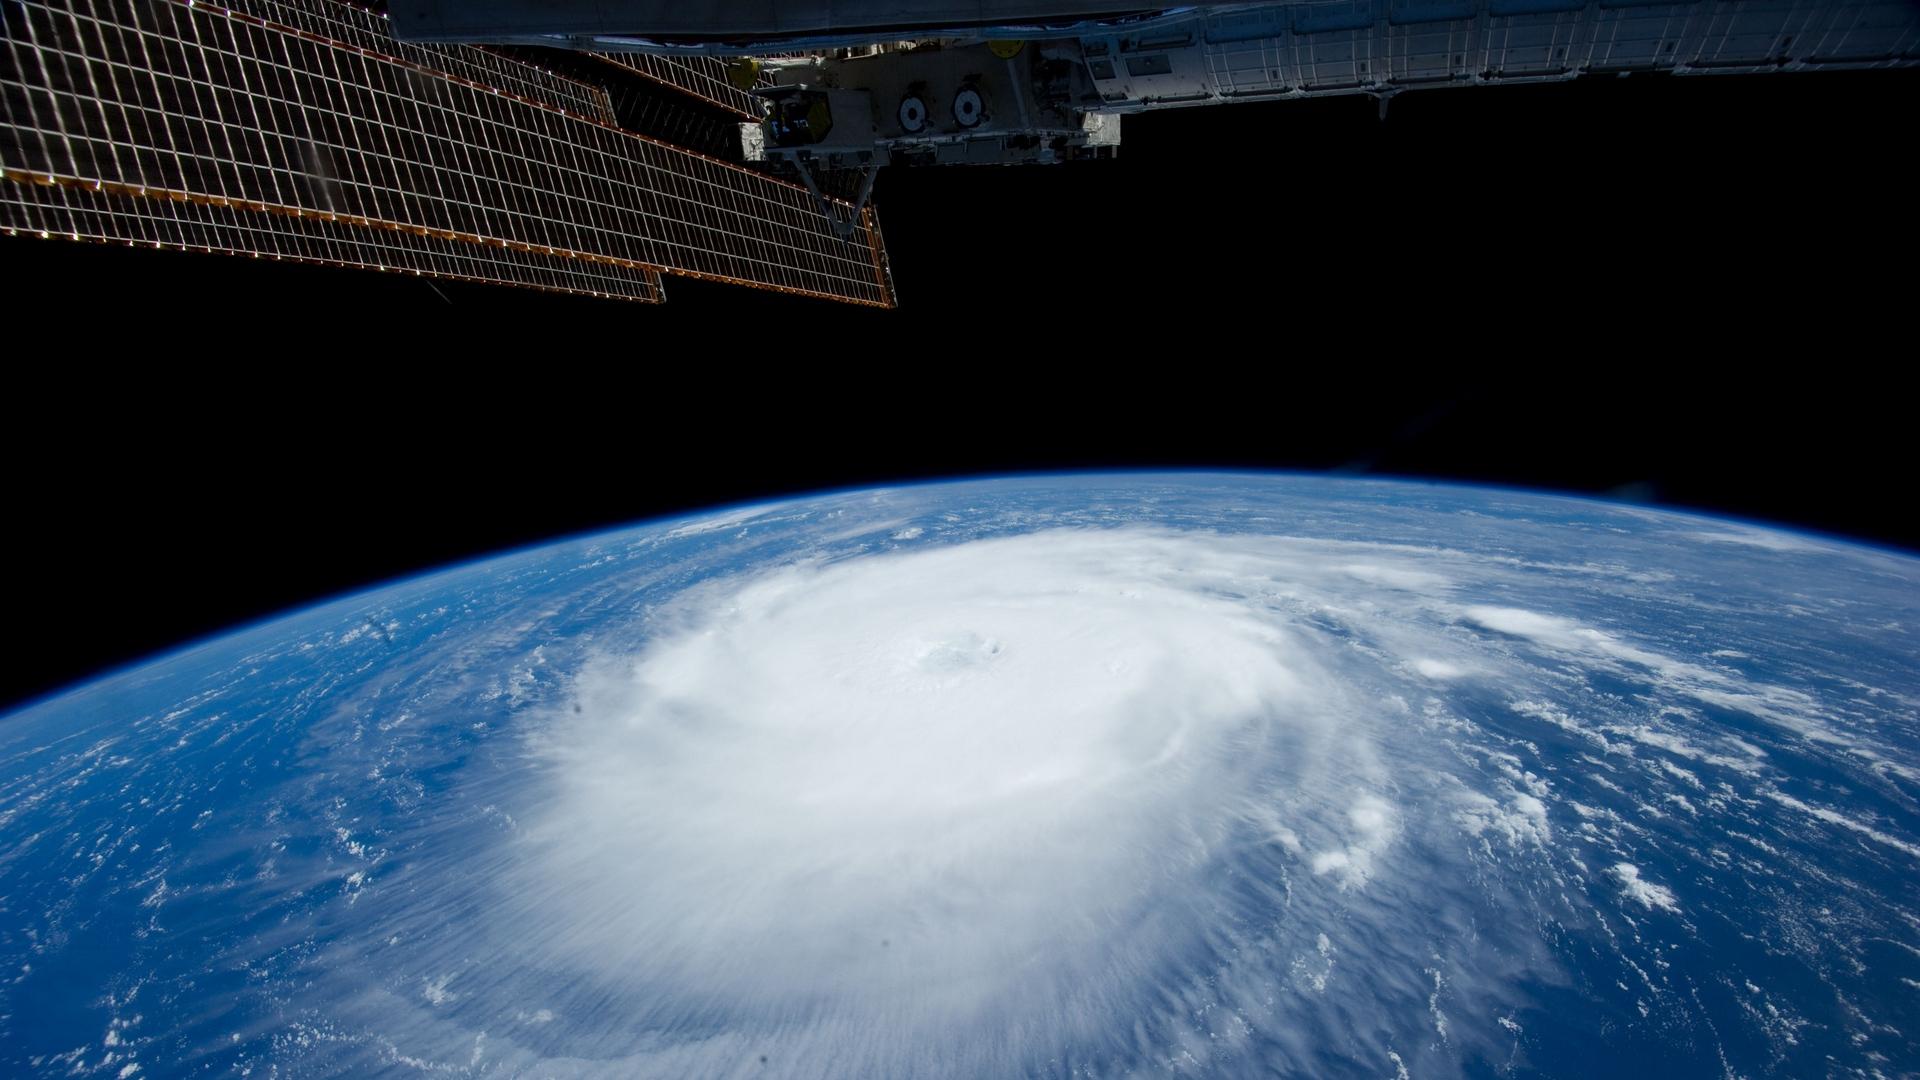 Download wallpaper 1920x1080 hurricane, iss, earth, clouds